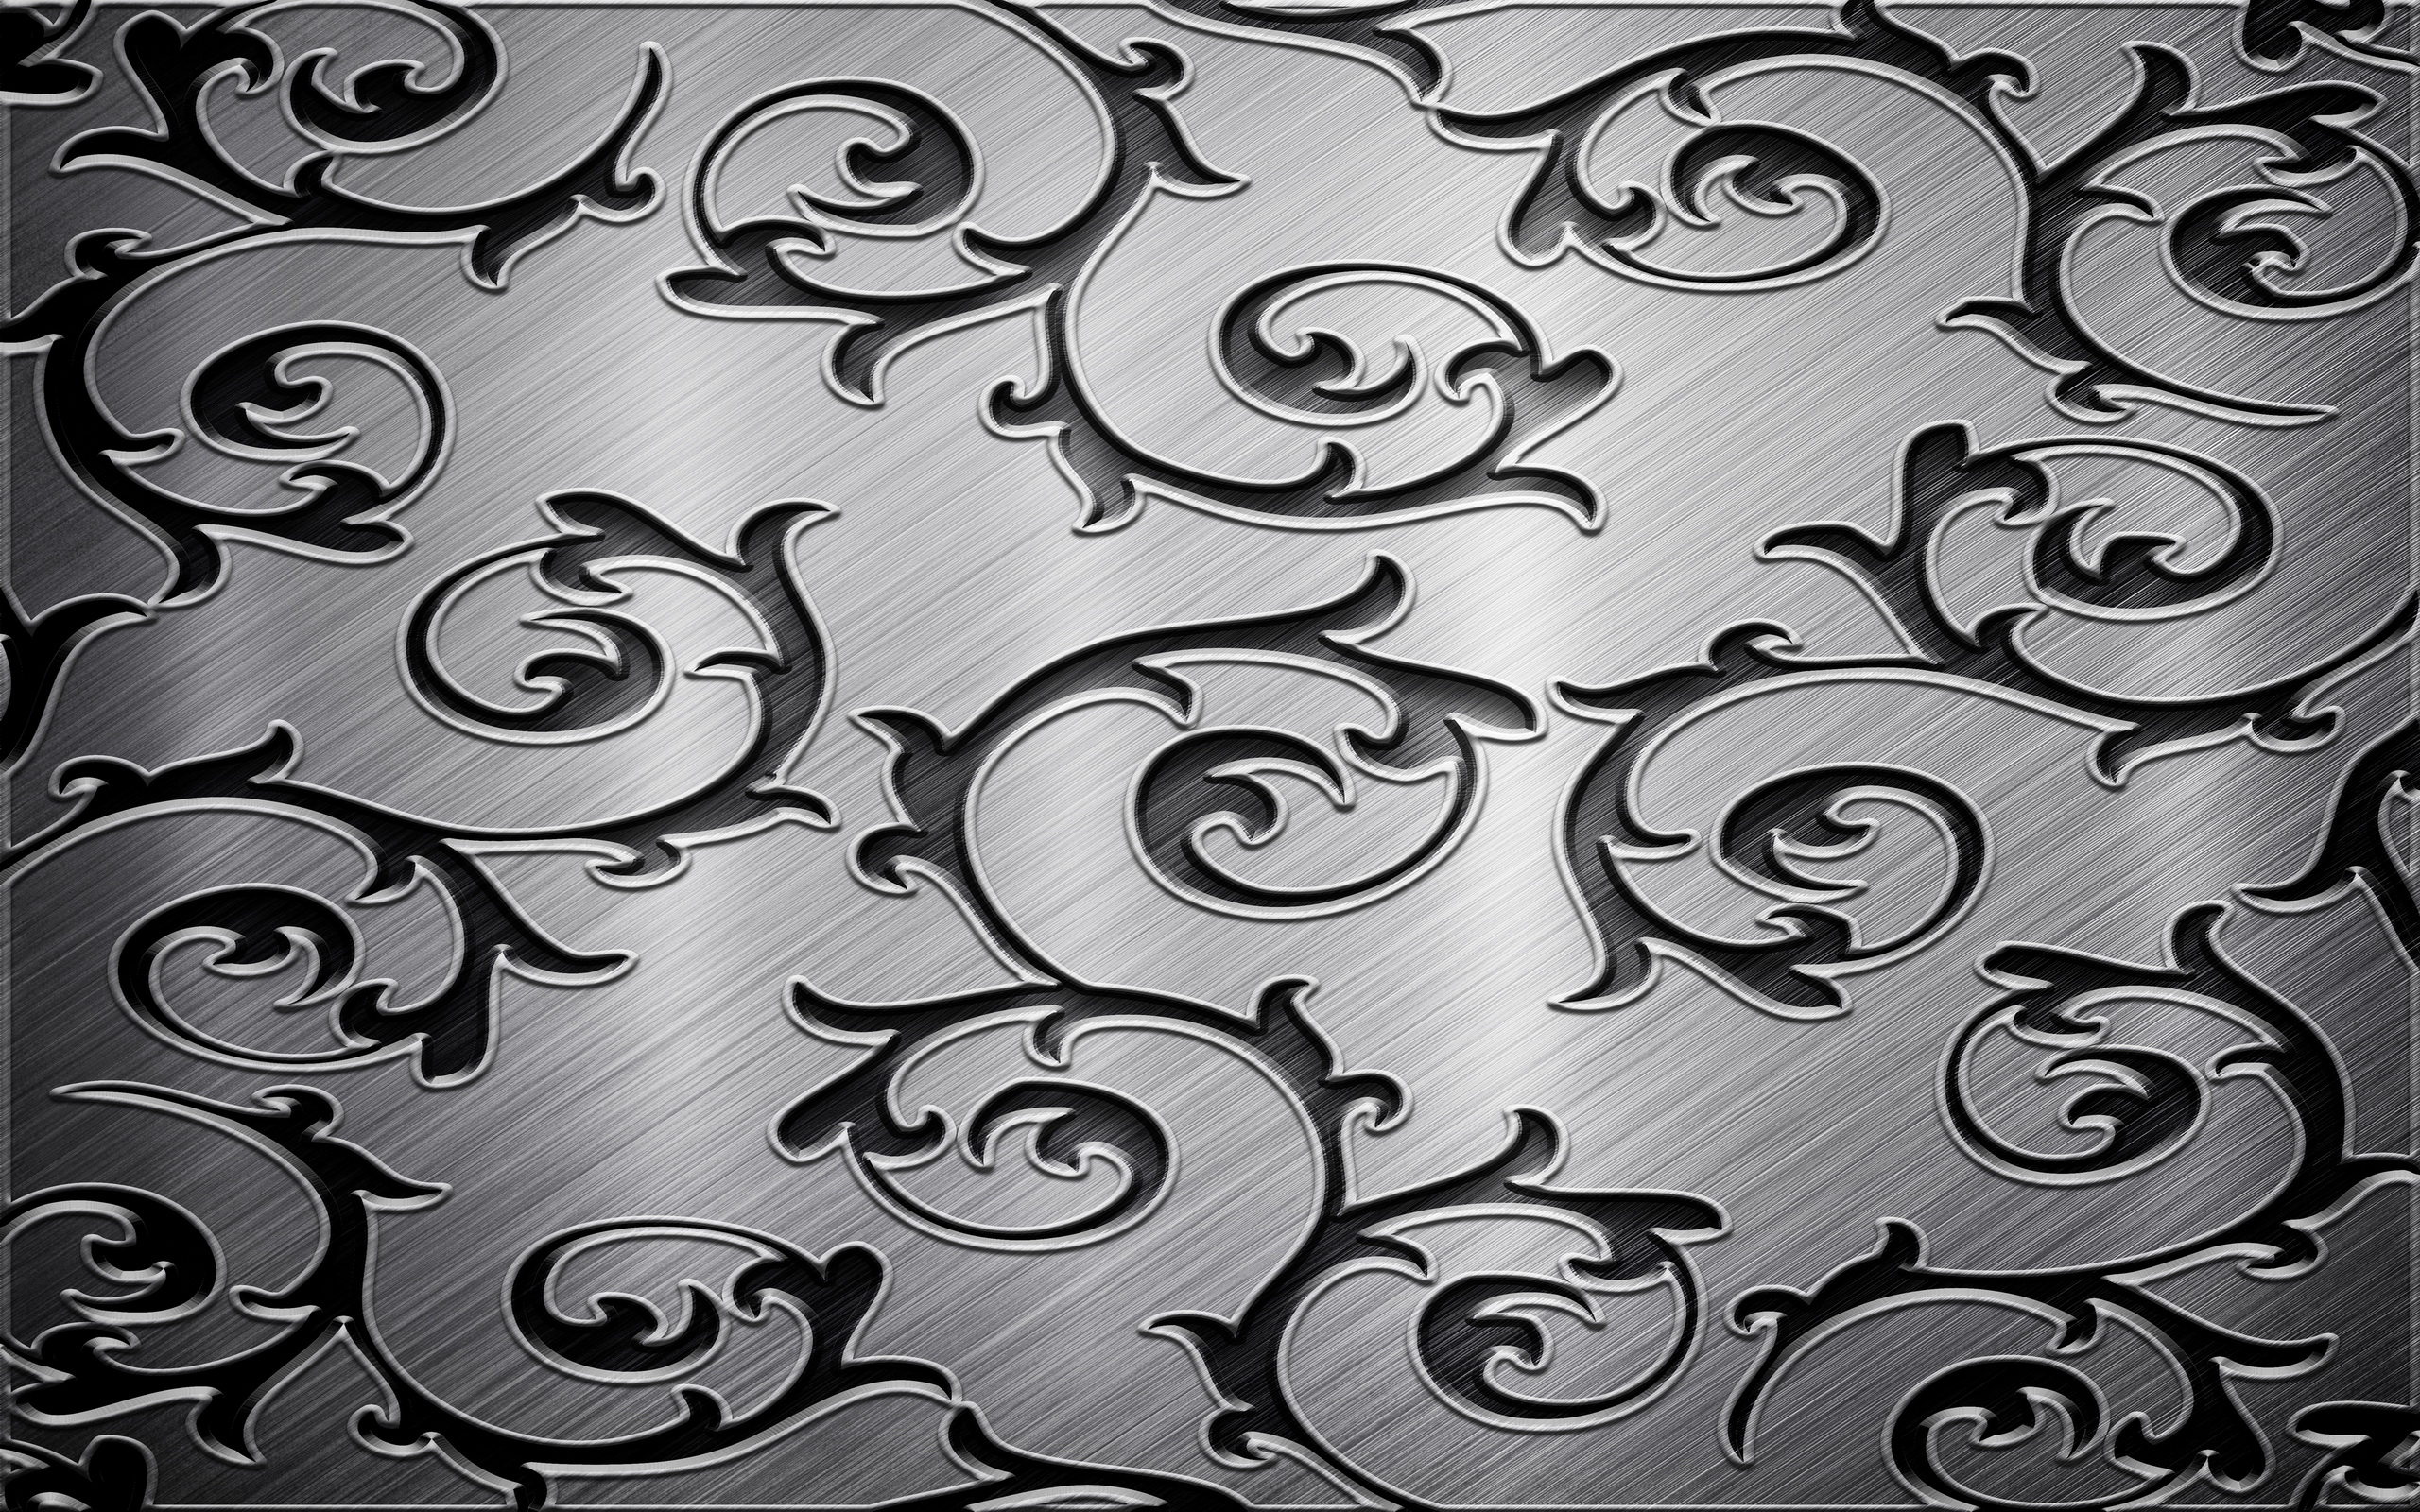 abstract, ornamental High Definition image